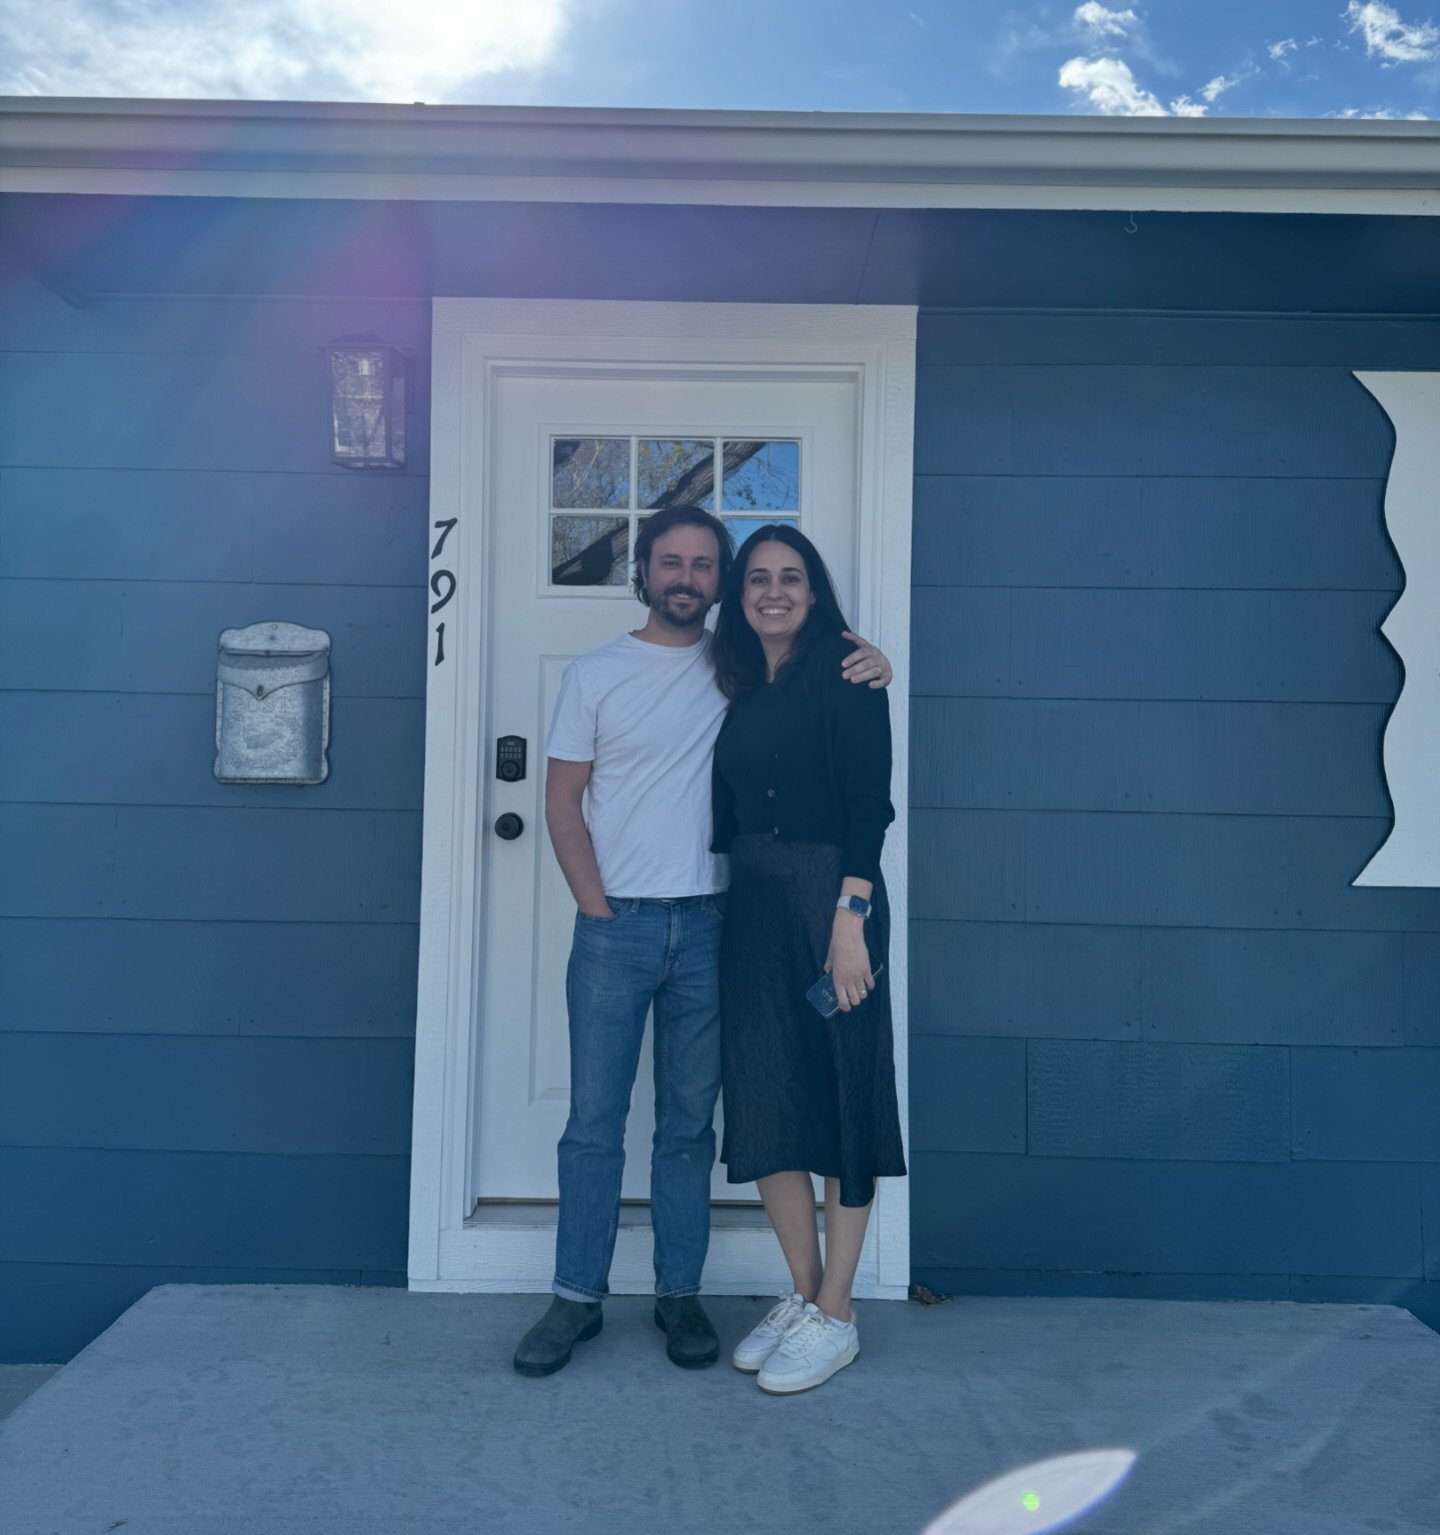 Congrats to Melody and Cole who closed on their first home yesterday! Their journey was certainly filled with its share of challenges, but they were determined, stayed positive, and @fsullivan4 went above and beyond throughout the process to help the